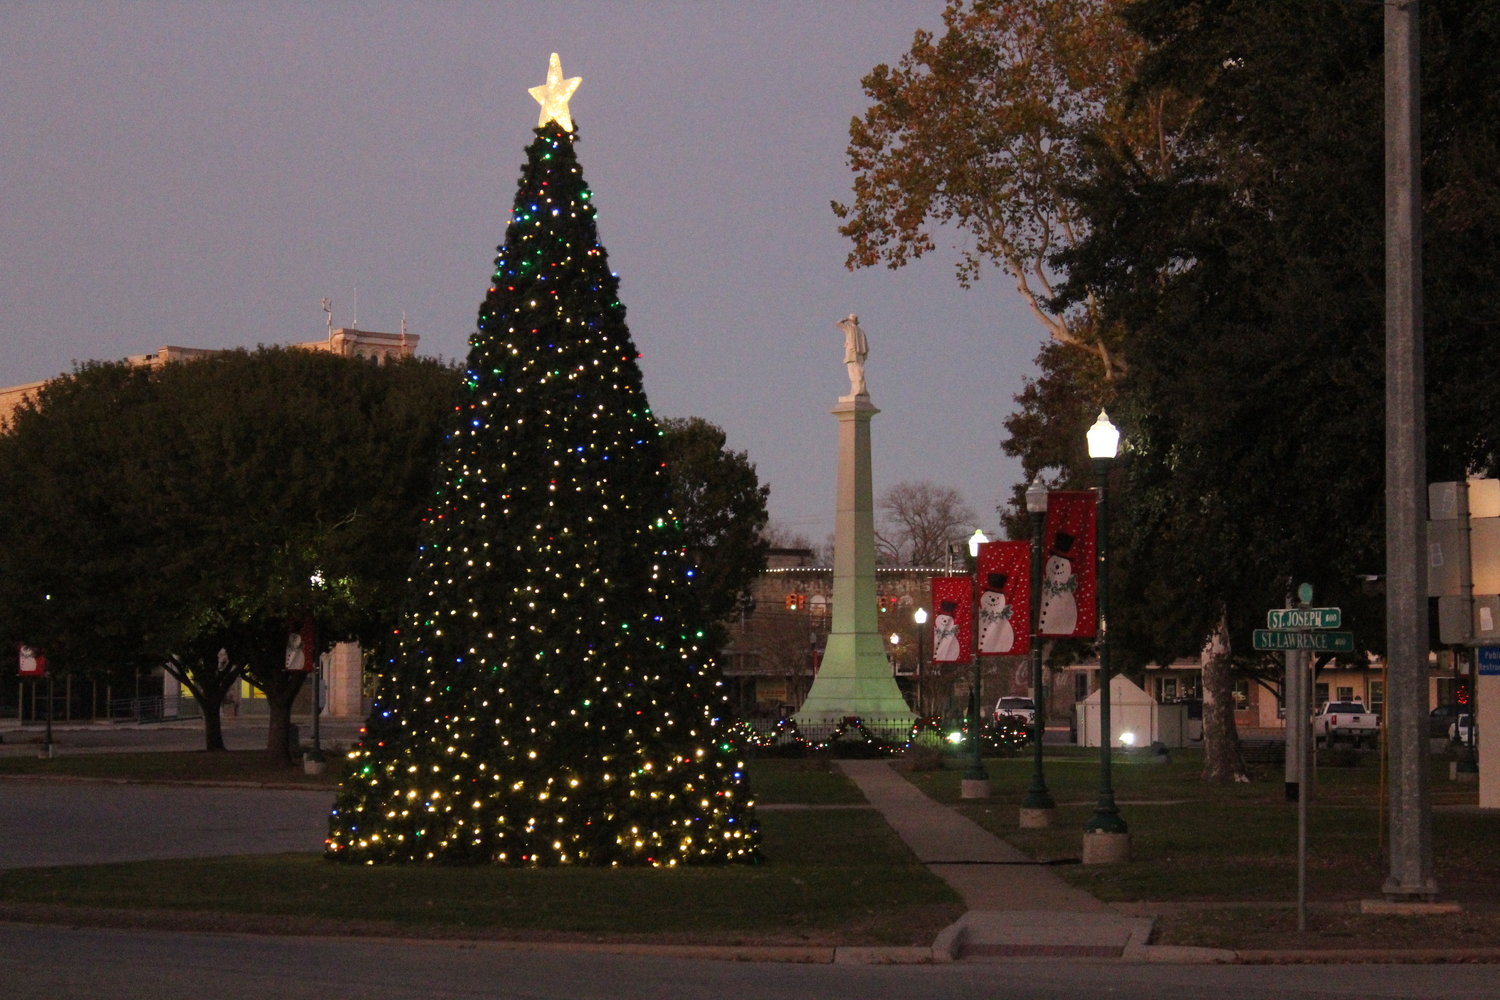 Gonzales Main Street has placed its Christmas lights, decorations and tree out across Confederate and Texas Heroes Square. “The Inquirer” is also getting into the spirit. We will be accepting letters to Santa until end of day Friday, Dec. 6. Those letters will be published in the Dec. 19 edition.